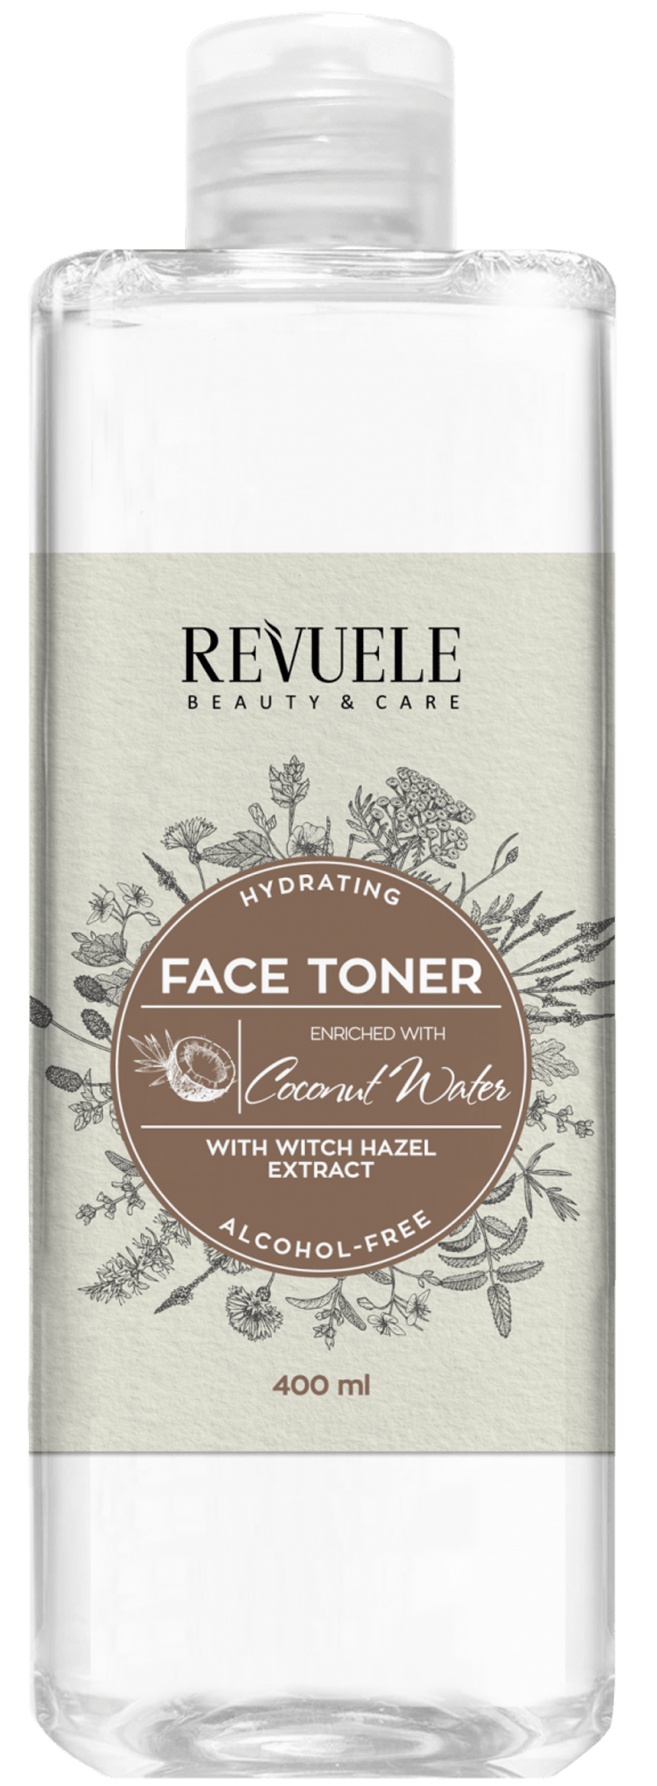 Revuele Hydrating Witch Hazel Face Toner With Coconut Water